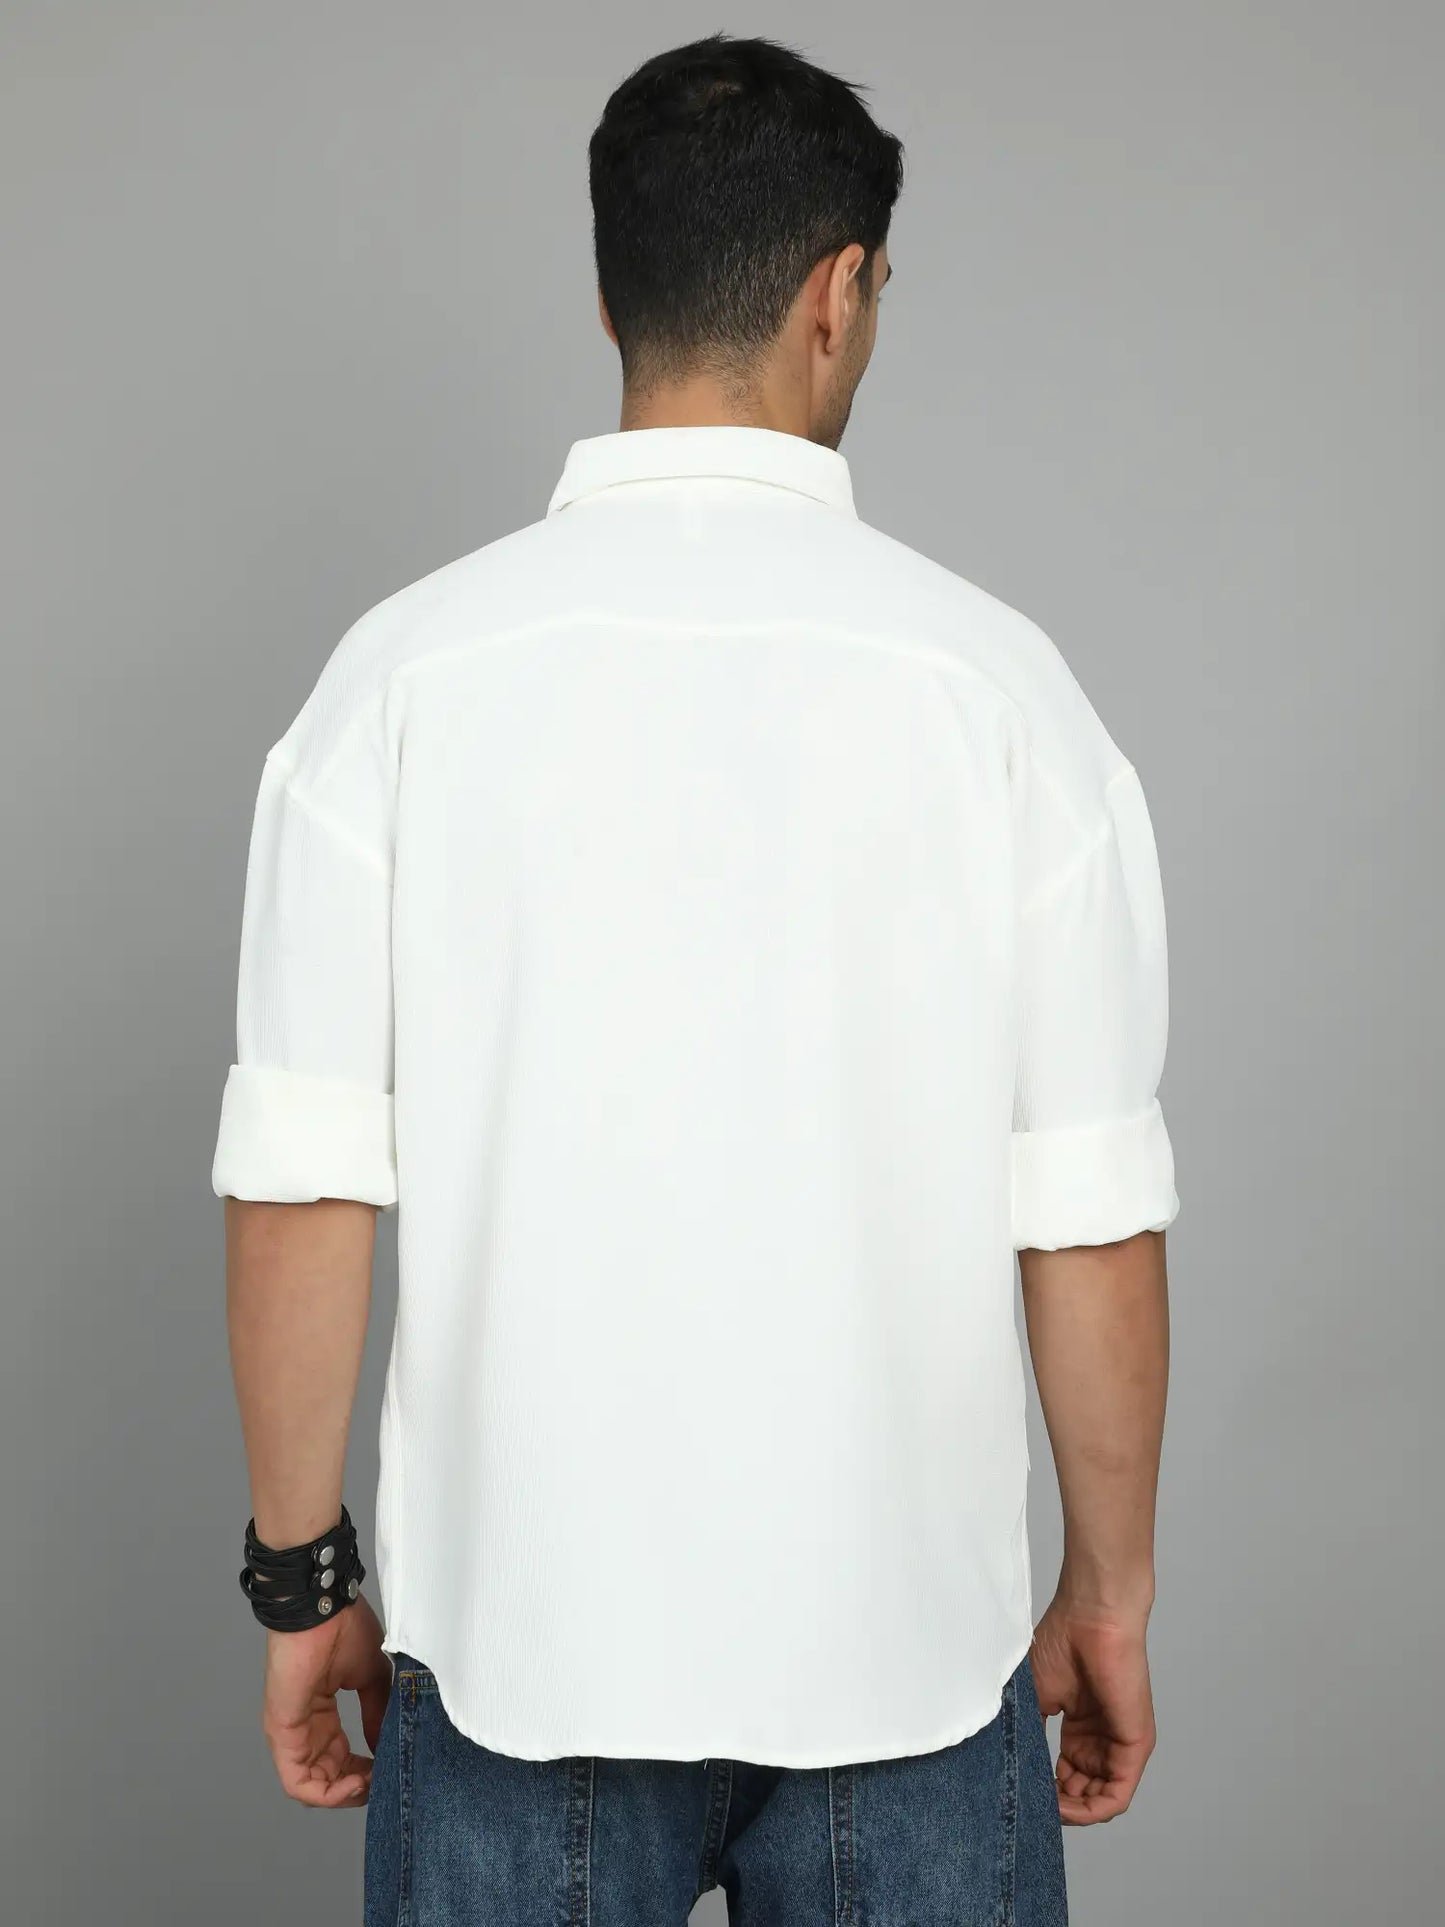 THICK AND TEXTURED WHITE IMPORTED DROP SHOULDER SHIRT